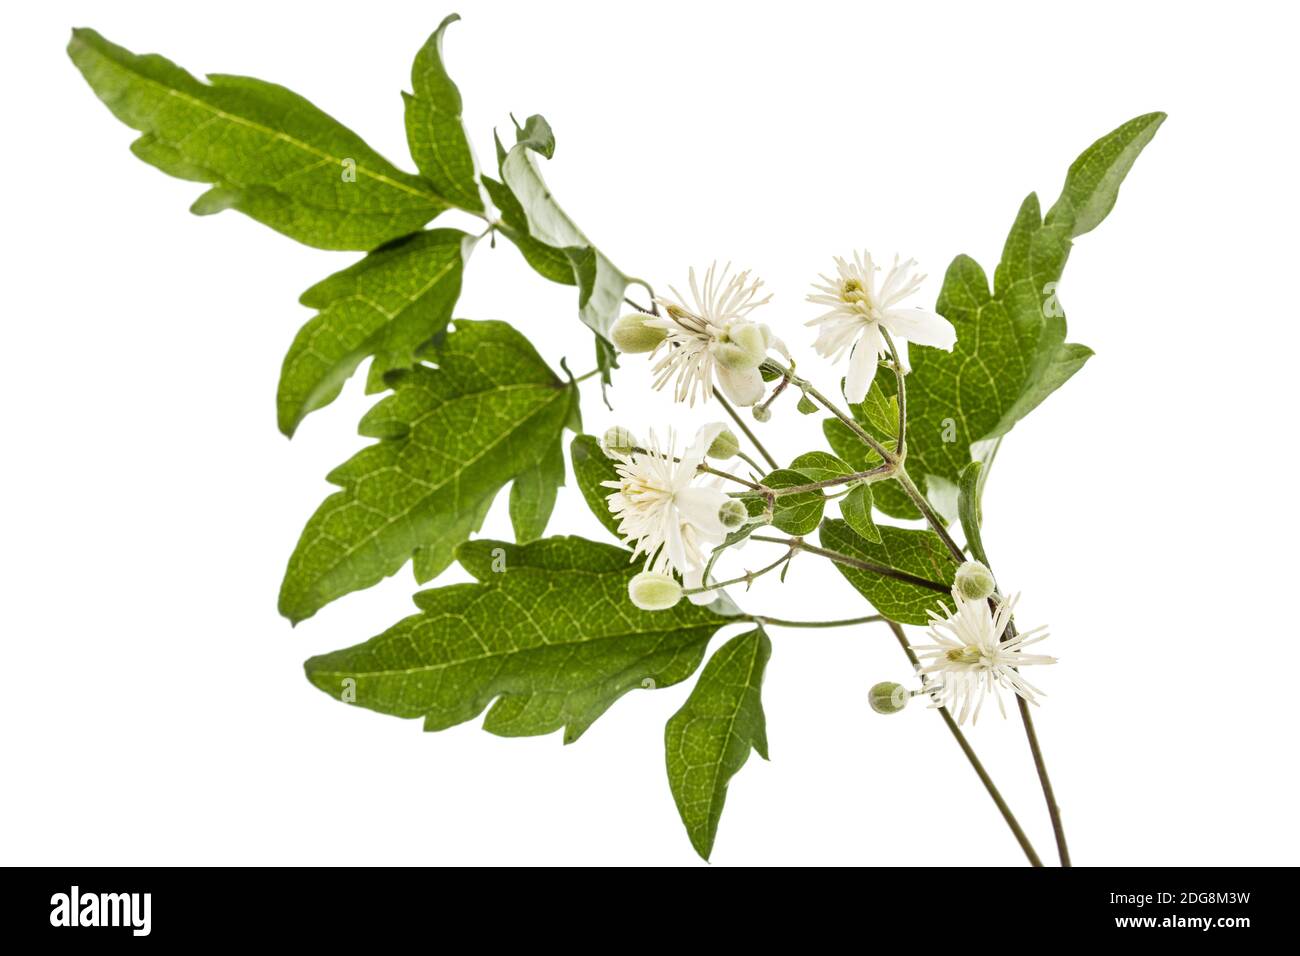 Flowers and leafs of Clematis , lat. Clematis vitalba L., isolated on white background Stock Photo